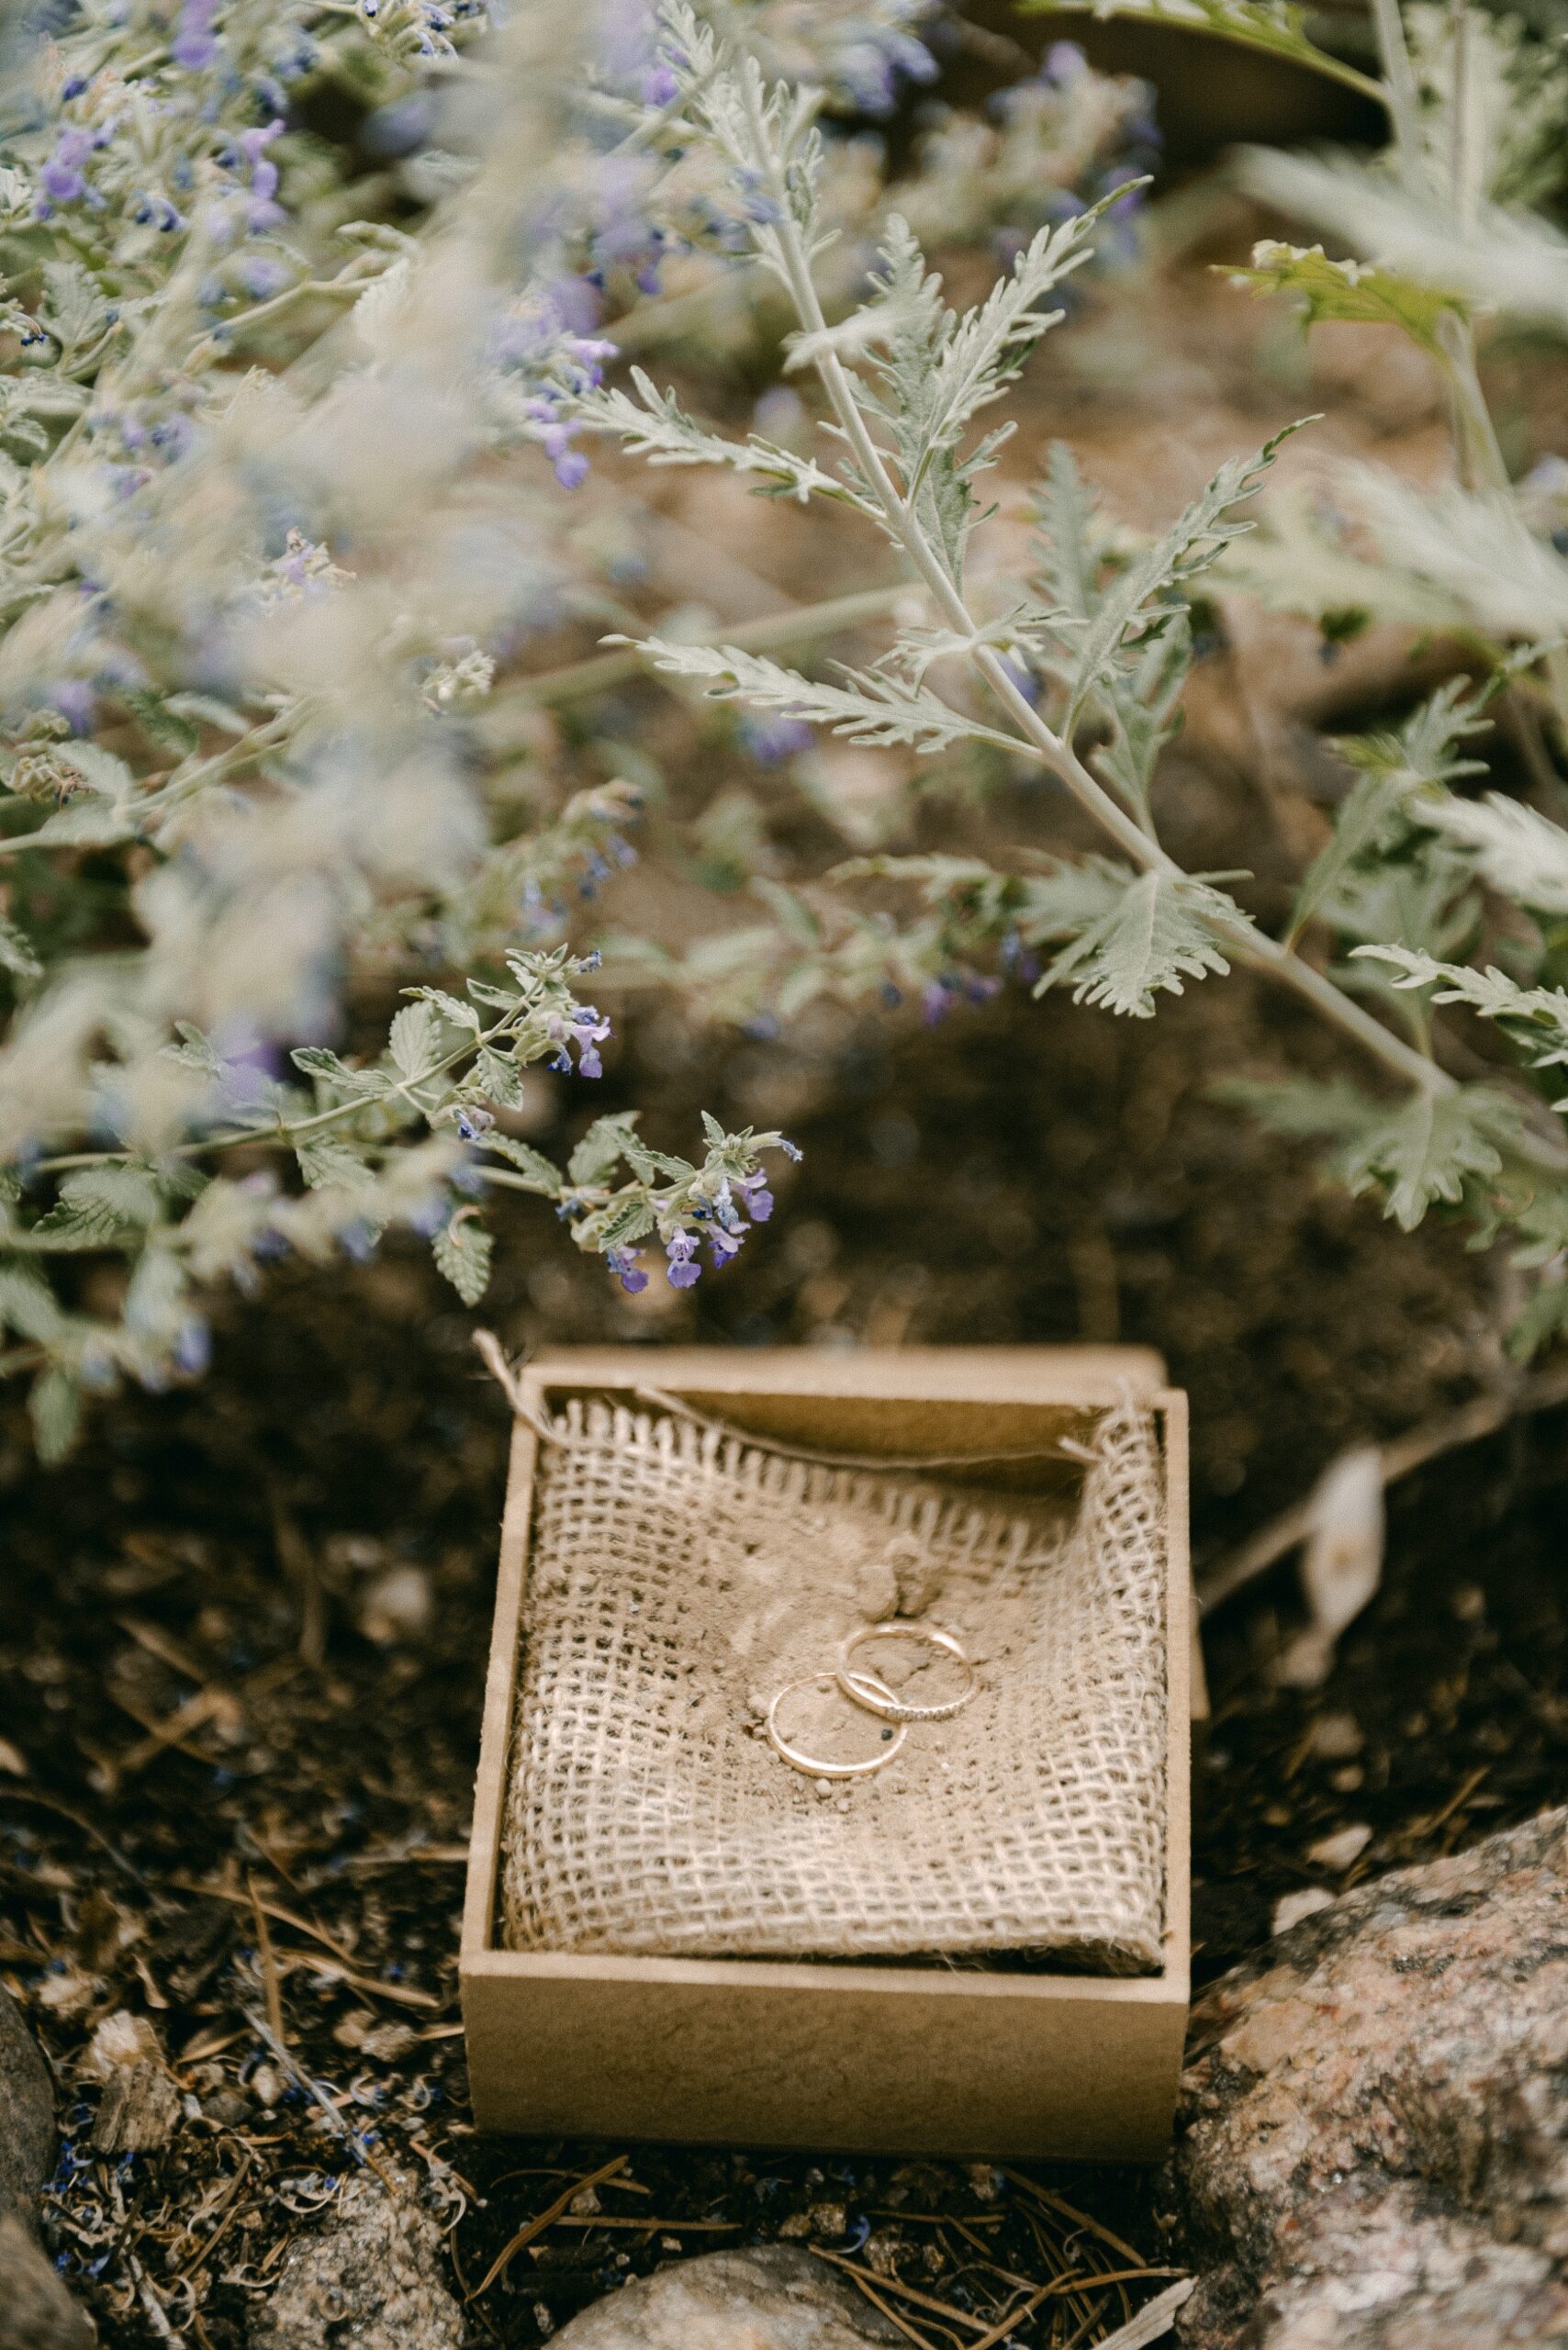 Photos of a Santa Fe elopement that took place at Inn of the Turquoise Bear in the heart of Santa Fe, New Mexico. Photo by Colorado wedding photographer, Ashley Joyce.